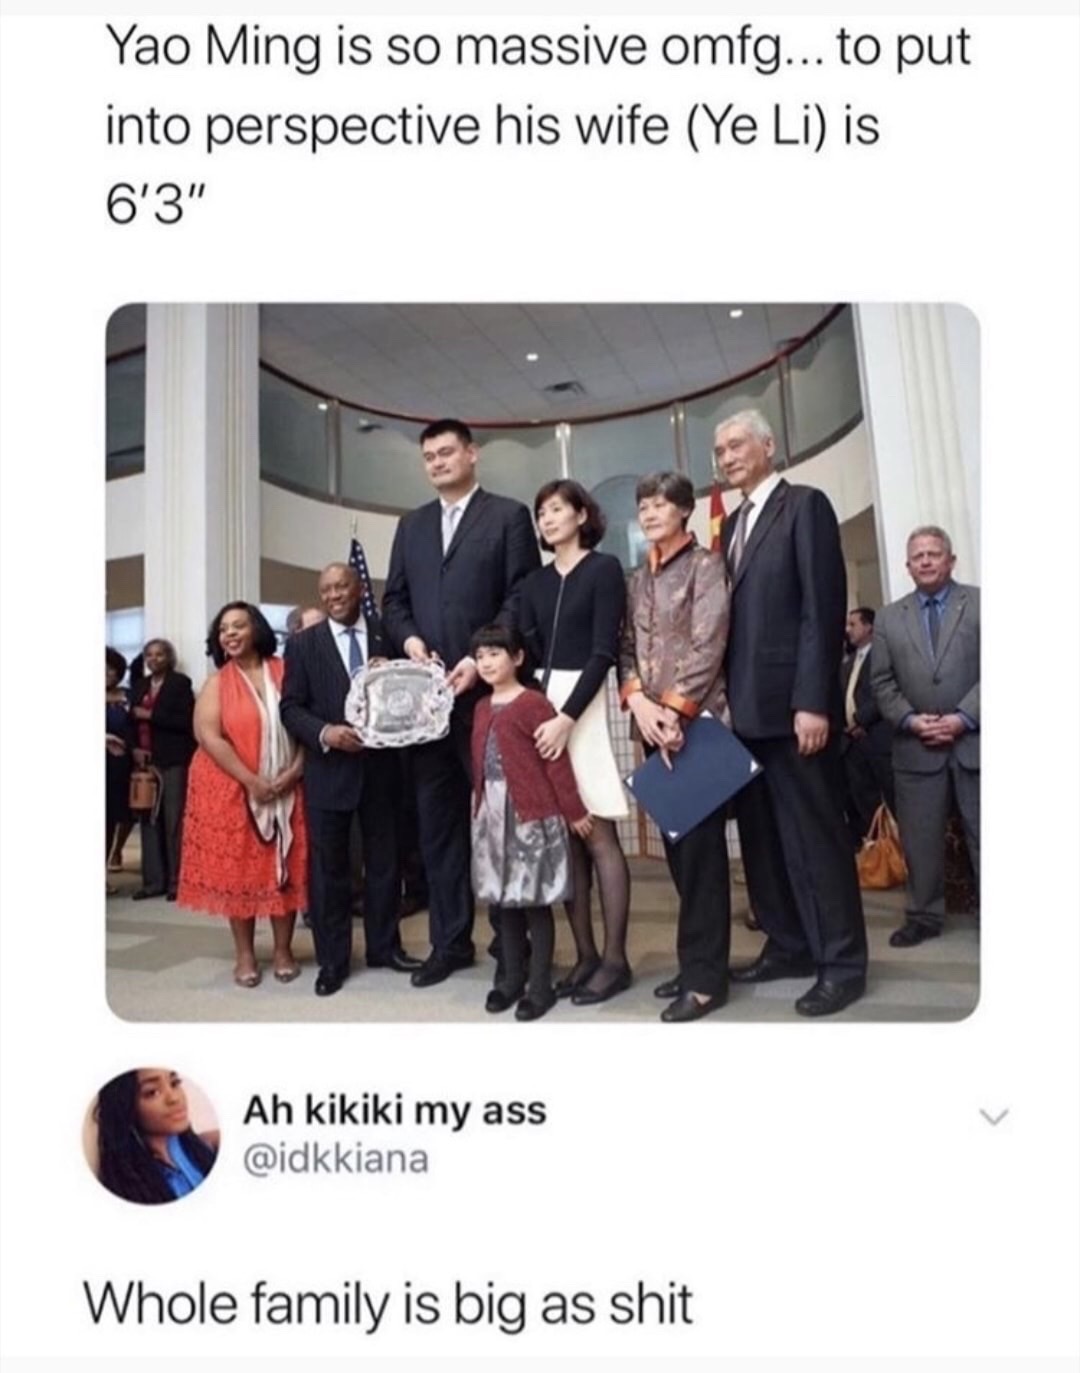 presentation - Yao Ming is so massive omfg... to put into perspective his wife Ye Li is 6'3" Ah kikiki my ass Whole family is big as shit